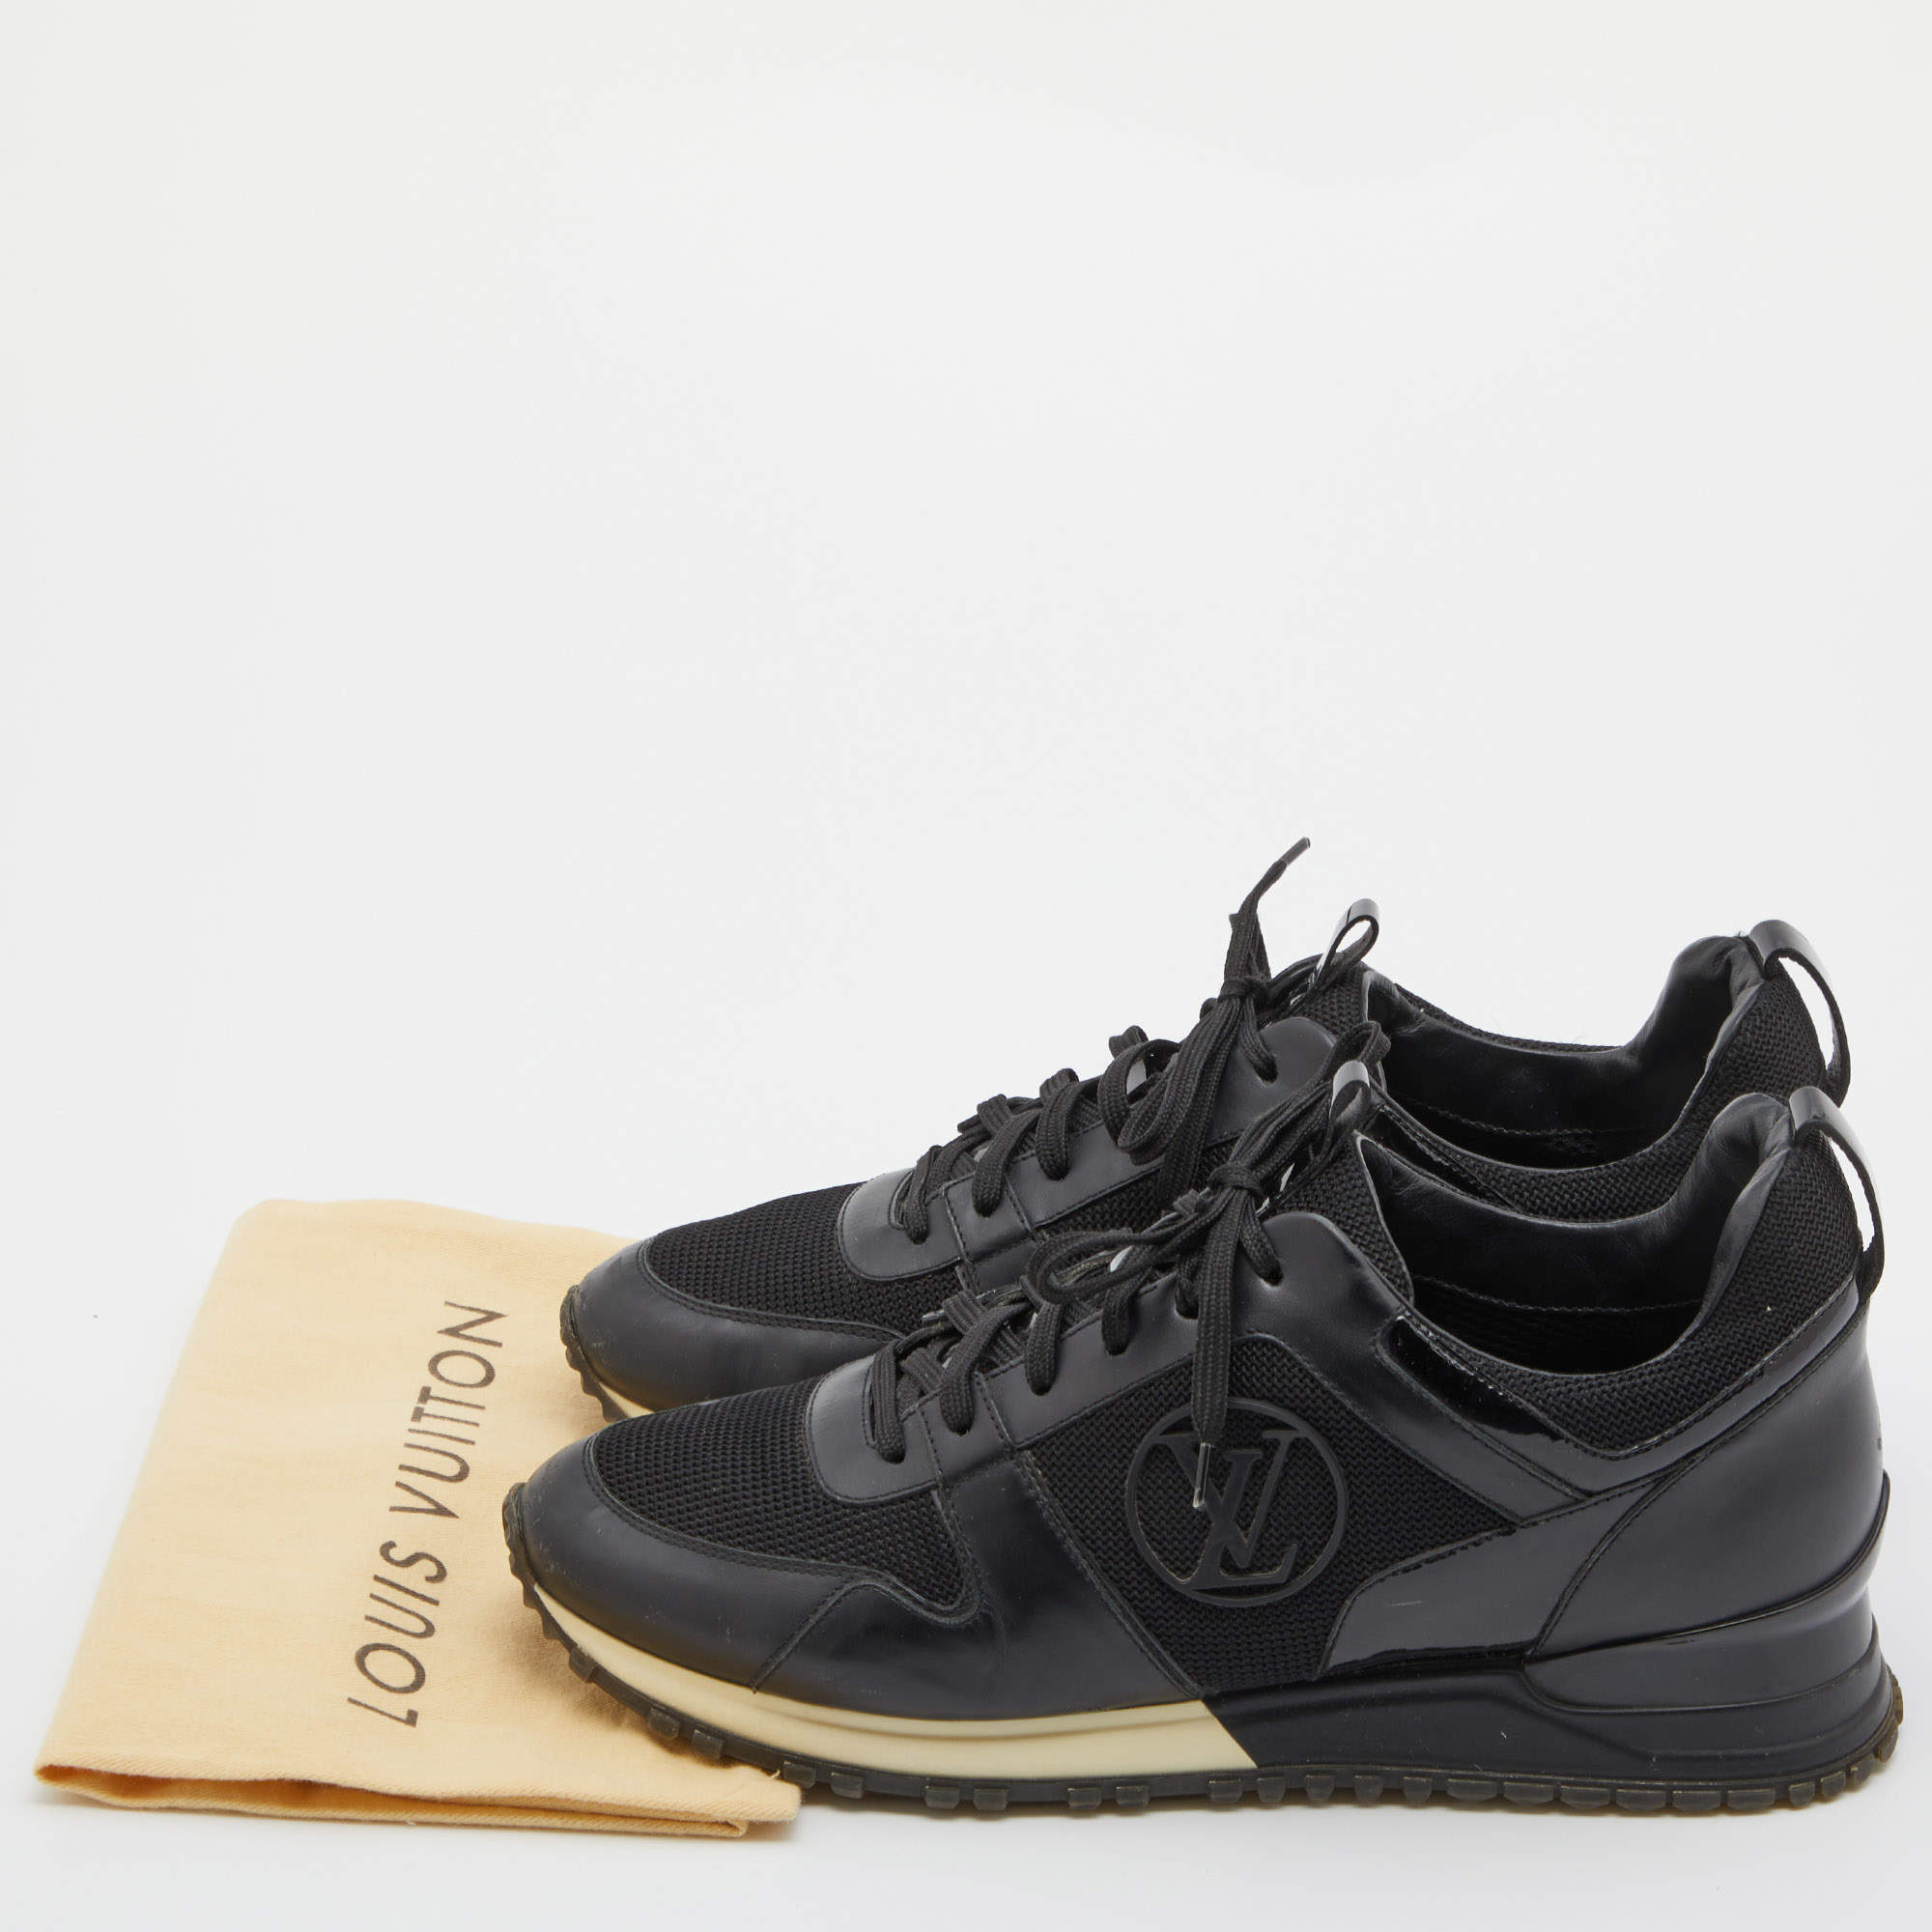 Run away leather trainers Louis Vuitton Black size 40 EU in Leather -  20072920